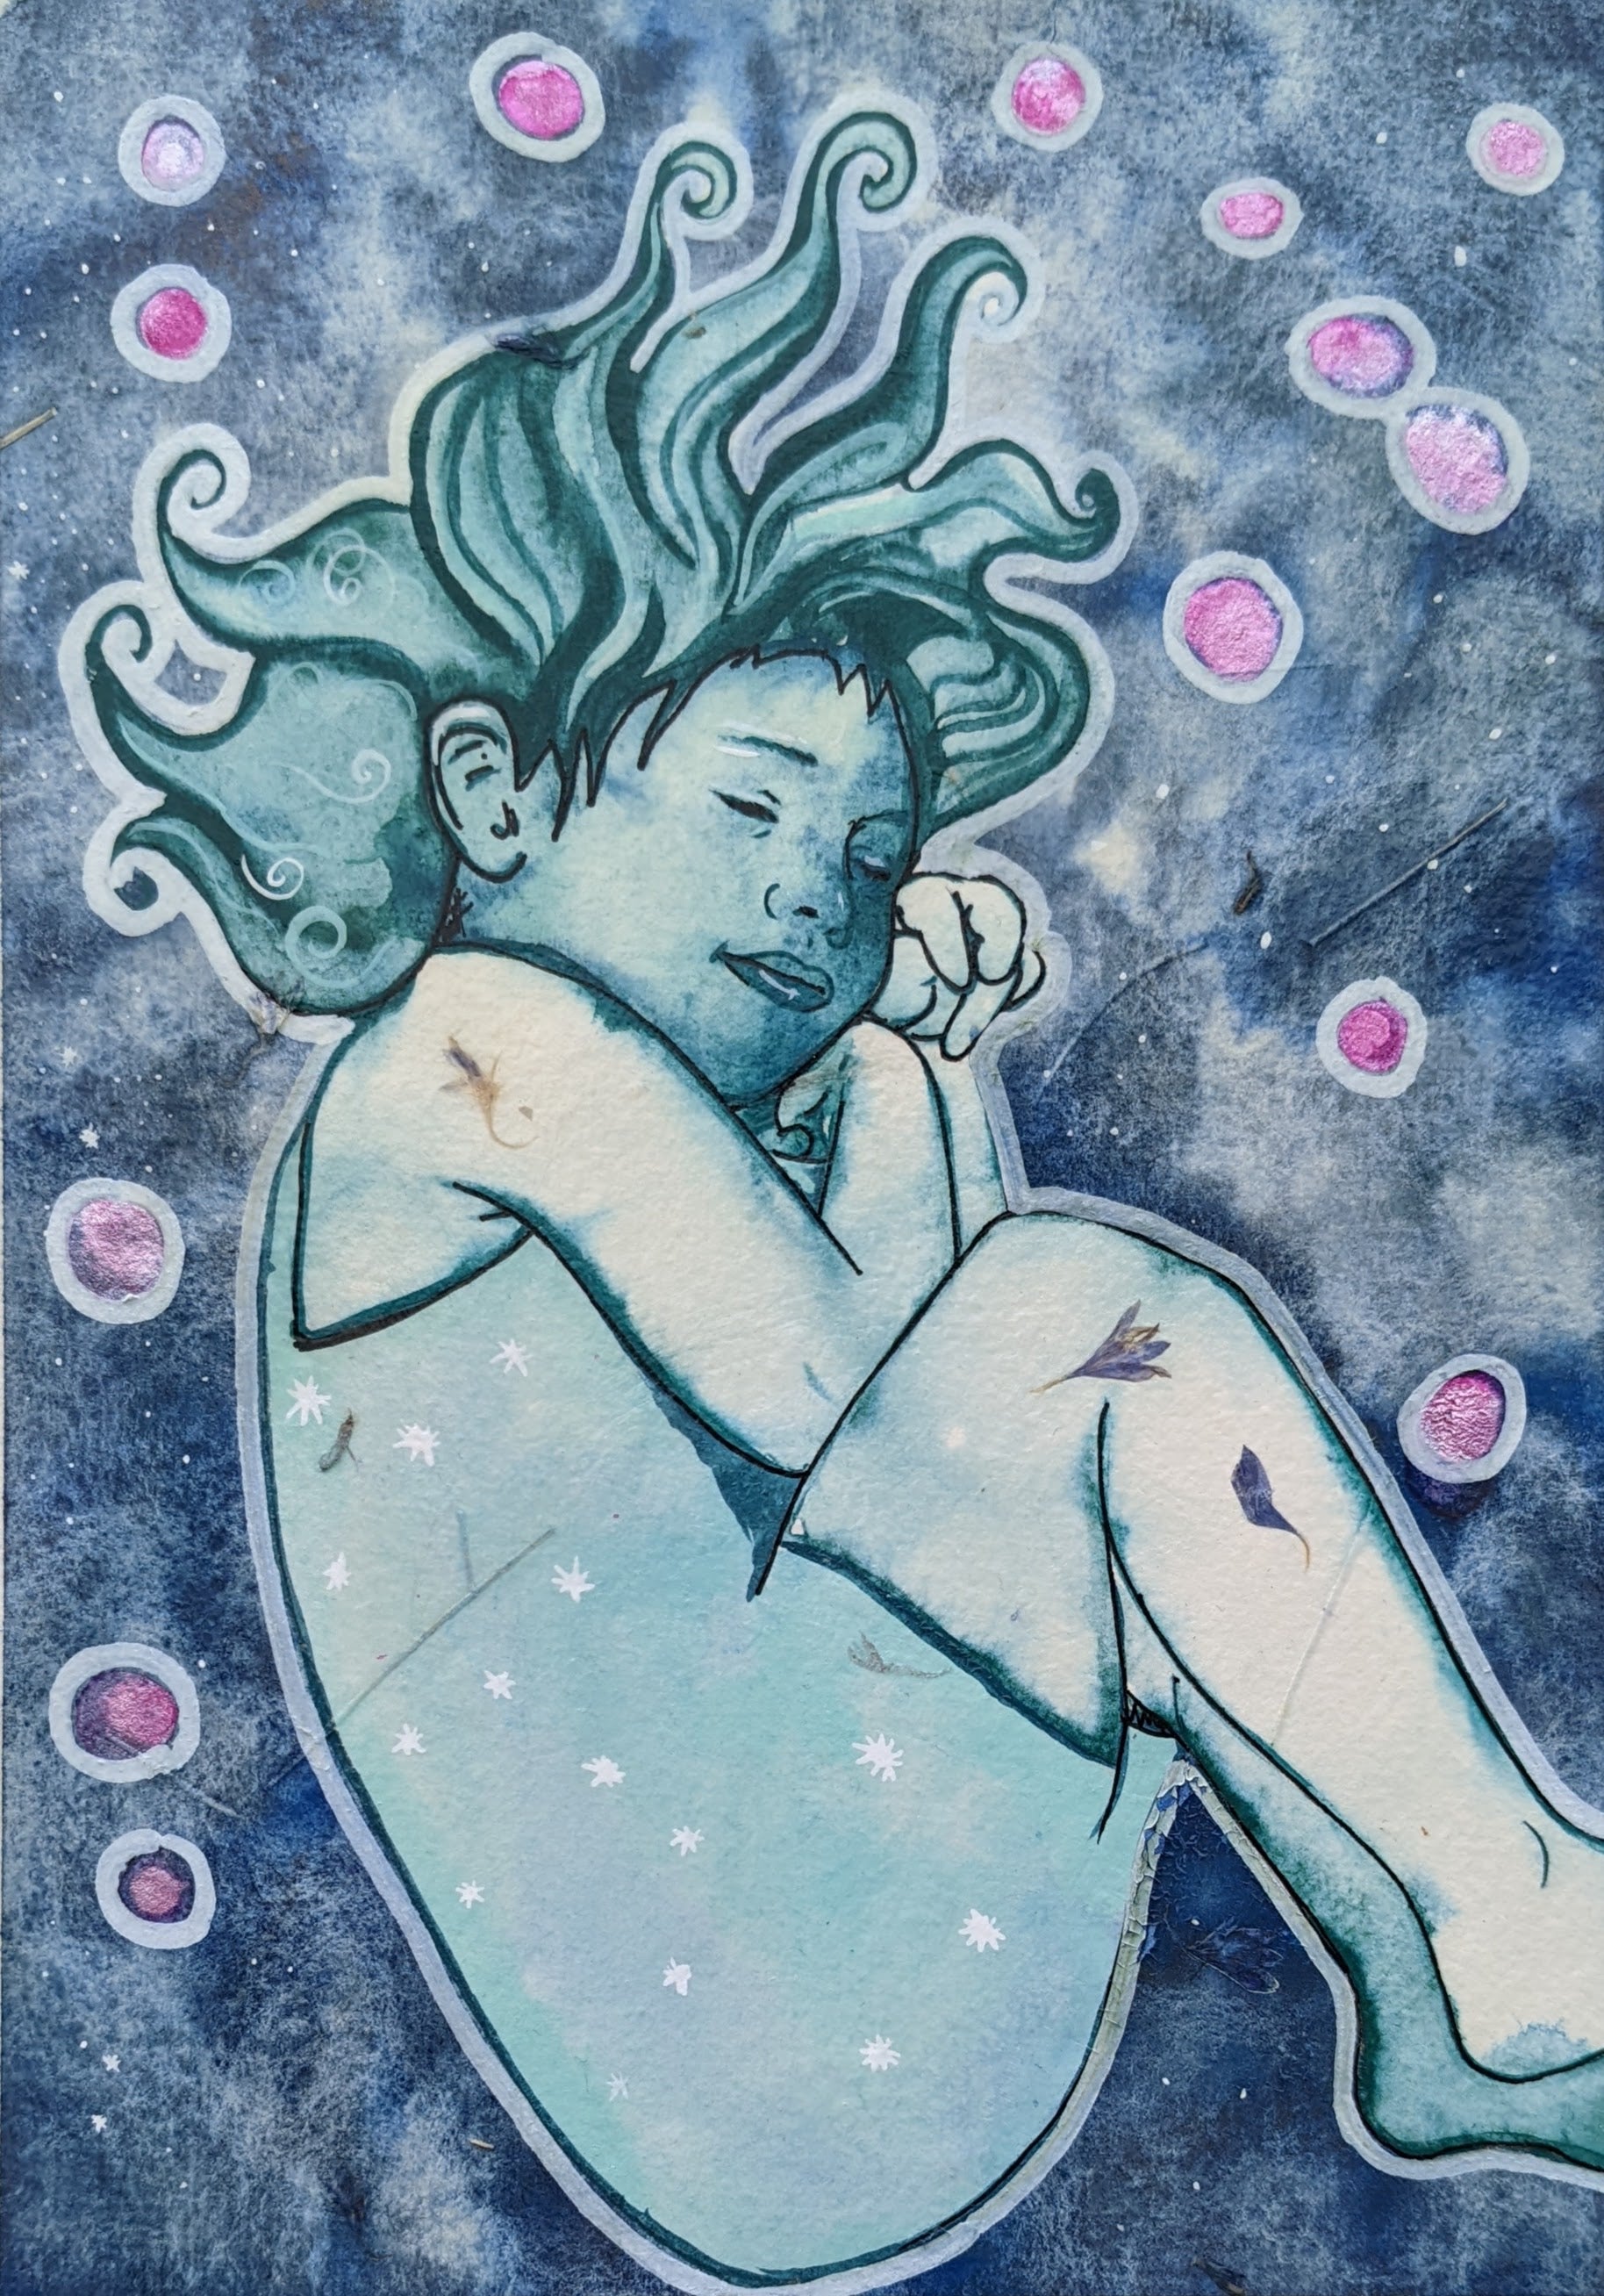 this original watercolour in blues of a peaceful sleeping child would be perfect for any home, especially for a nursery